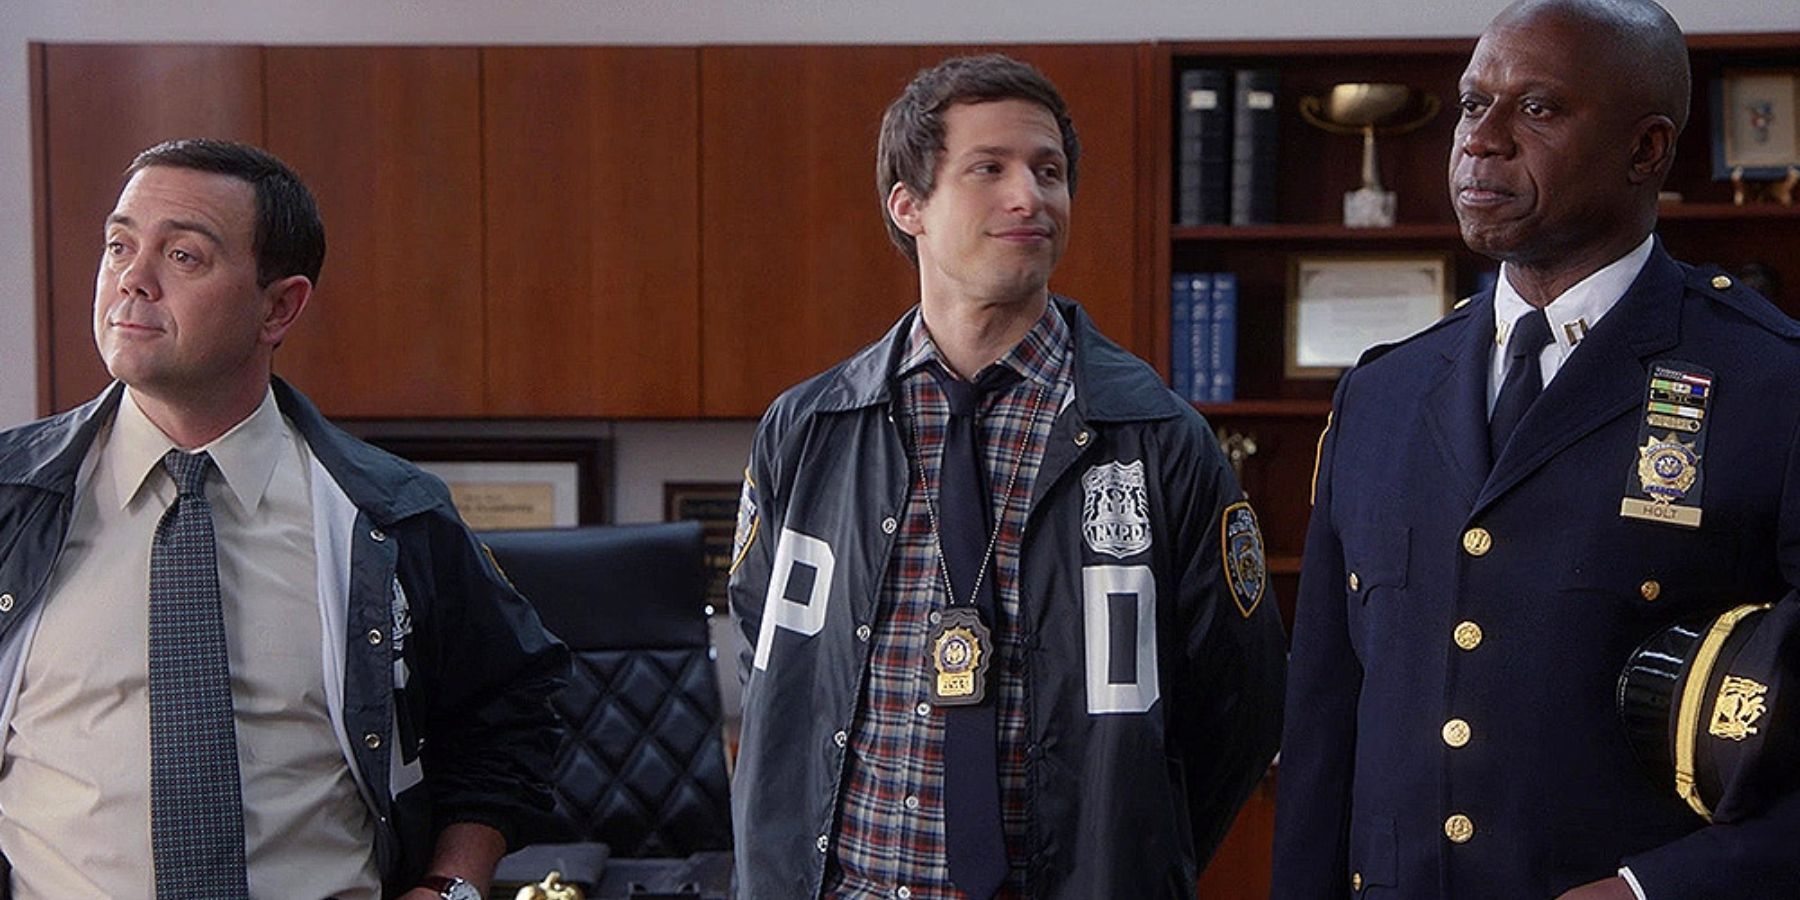 Jake. Charles, and Holt standing next to each other in Brooklyn Nine-Nine